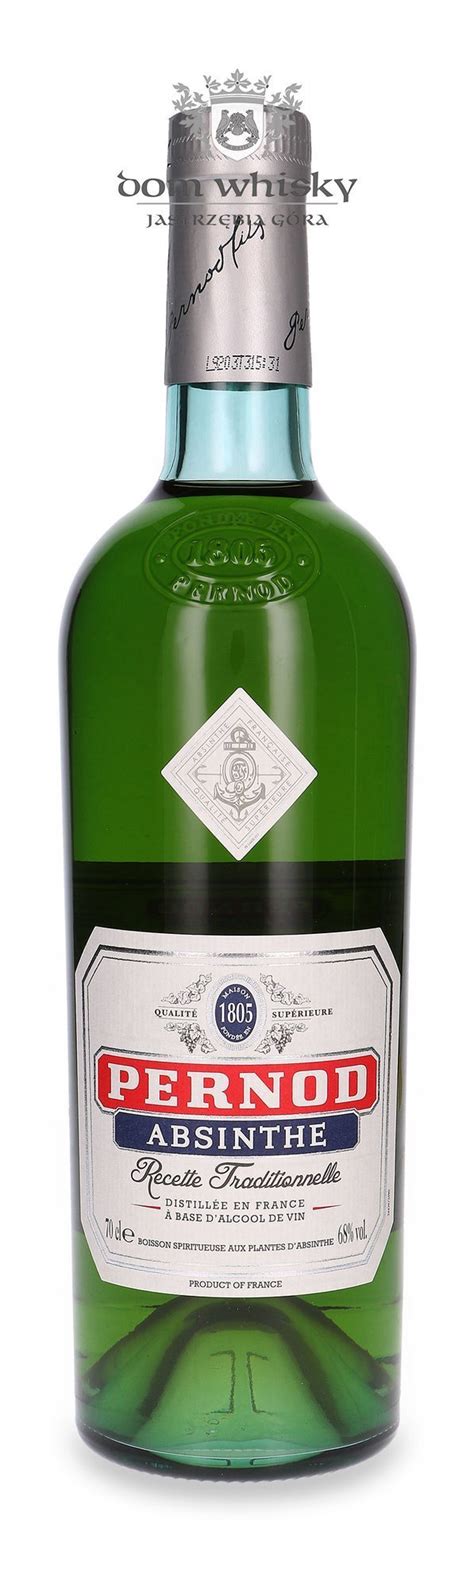 Pernod absinthe. Pernod Absinthe Superieure Original Recipe from France - The great Pontarlier absinthe and anise are distilled after maceration in wine alcohol. The best of the high quality distillate is then macerated again. It incl... 